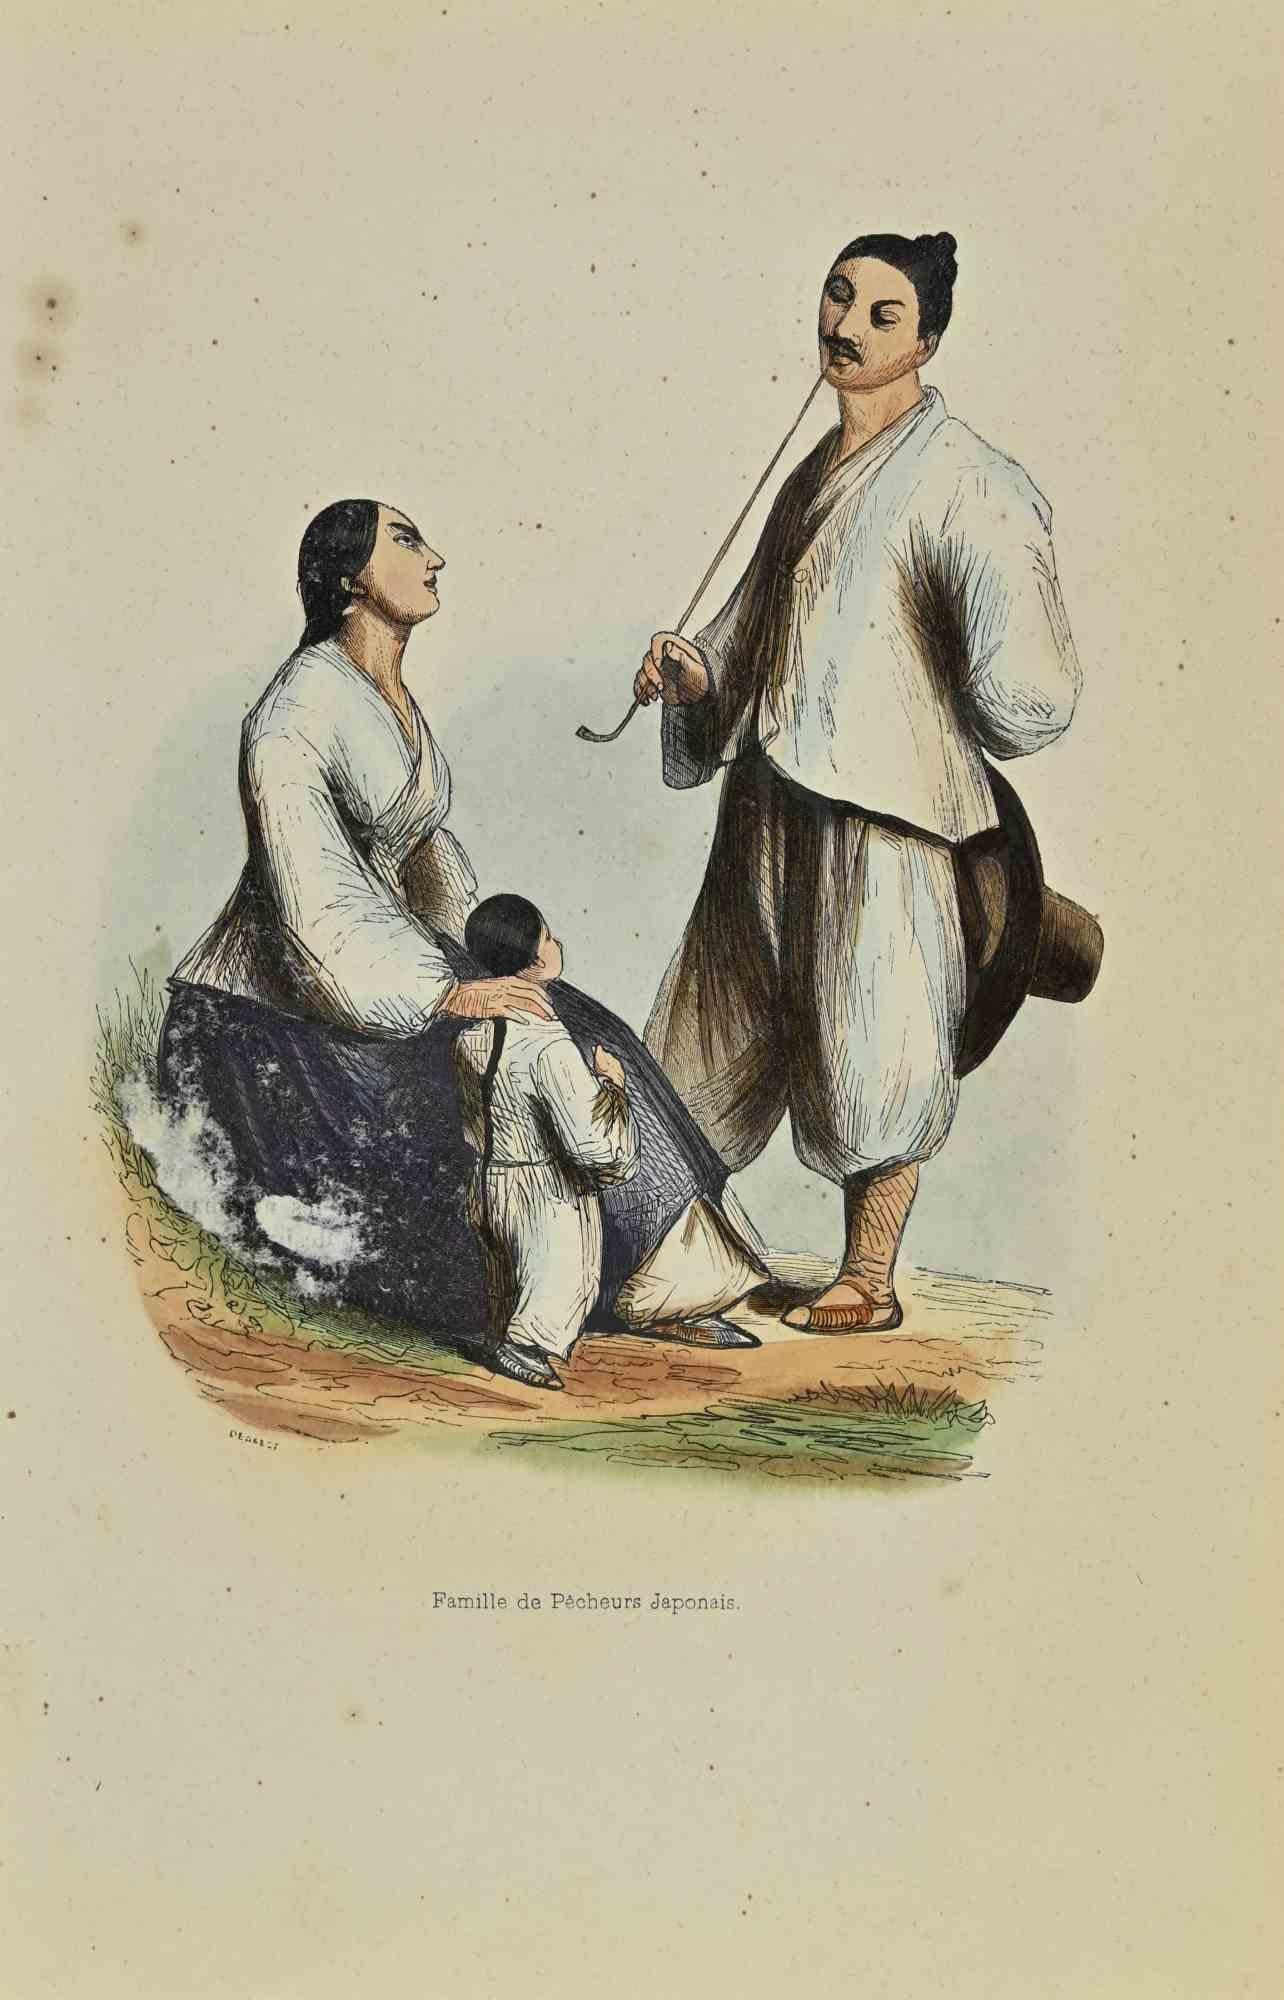 Family of Japanese Fishermen is a lithograph made by Auguste Wahlen in 1844.

Hand colored.

Good condition.

At the center of the artwork is the original title "Famille de Pecheurs Japonais".

The work is part of Suite Moeurs, usages et costumes de